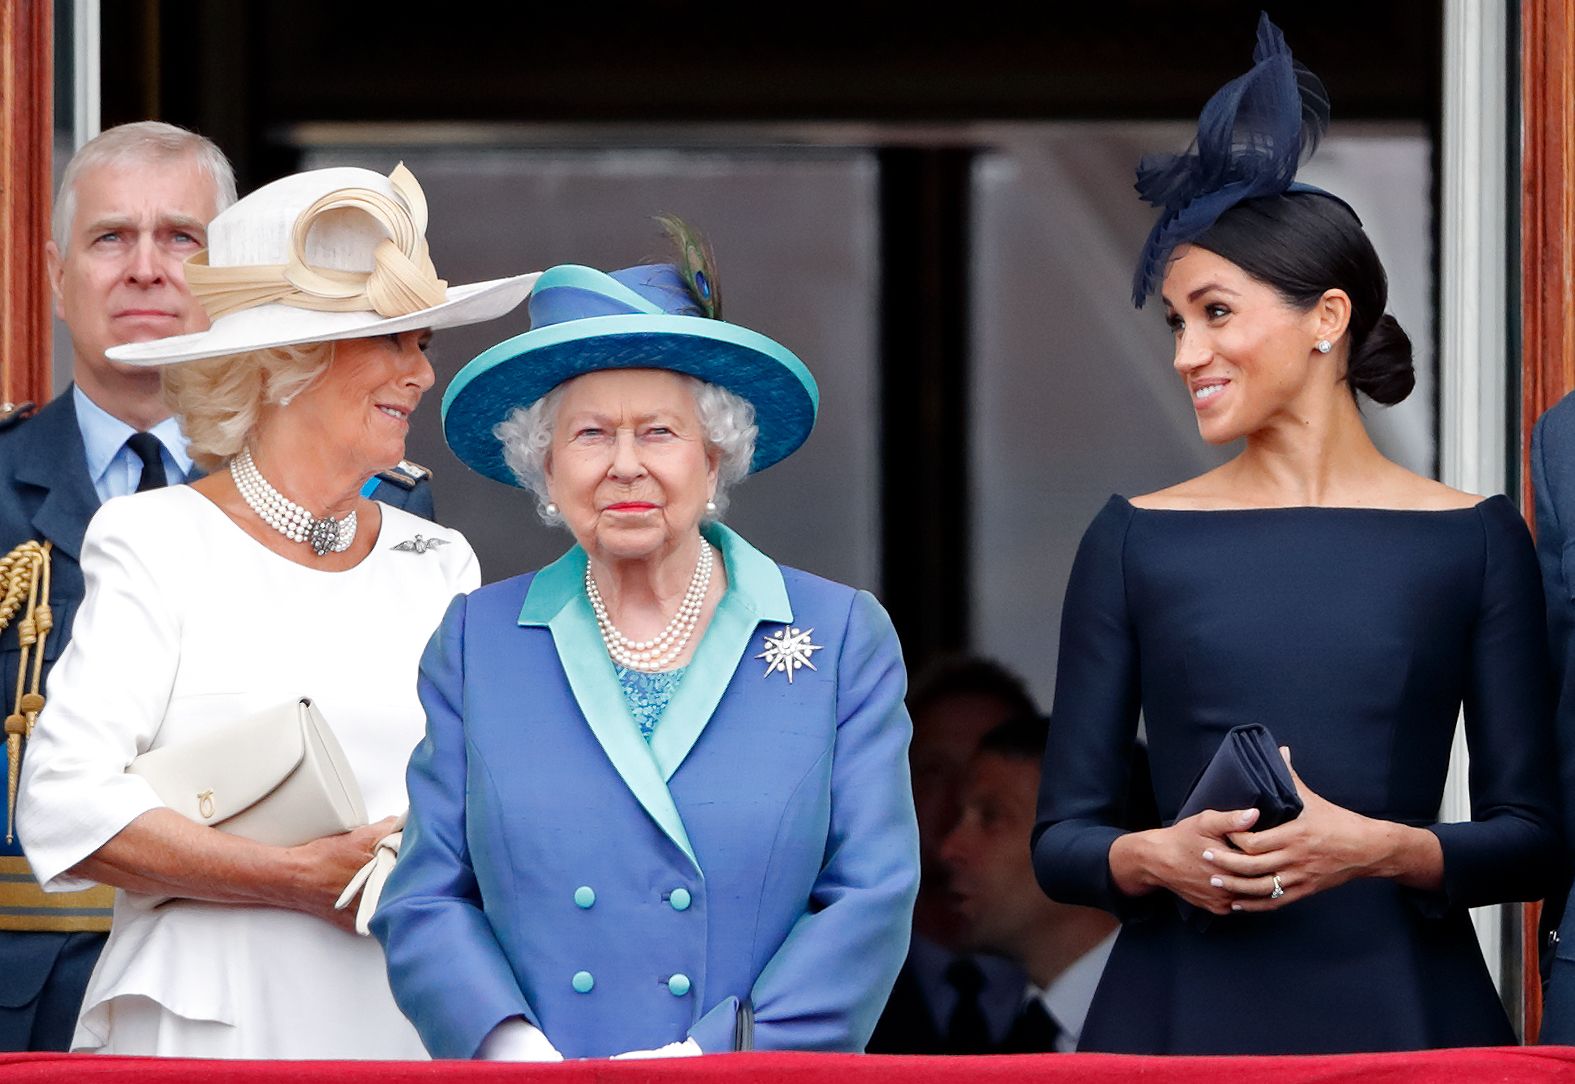 Duchess Camilla, Queen Elizabeth II, and Duchess Meghan mark the centenary of the Royal Air Force on July 10, 2018, in London, England. | Source: Max Mumby/Indigo/Getty Images